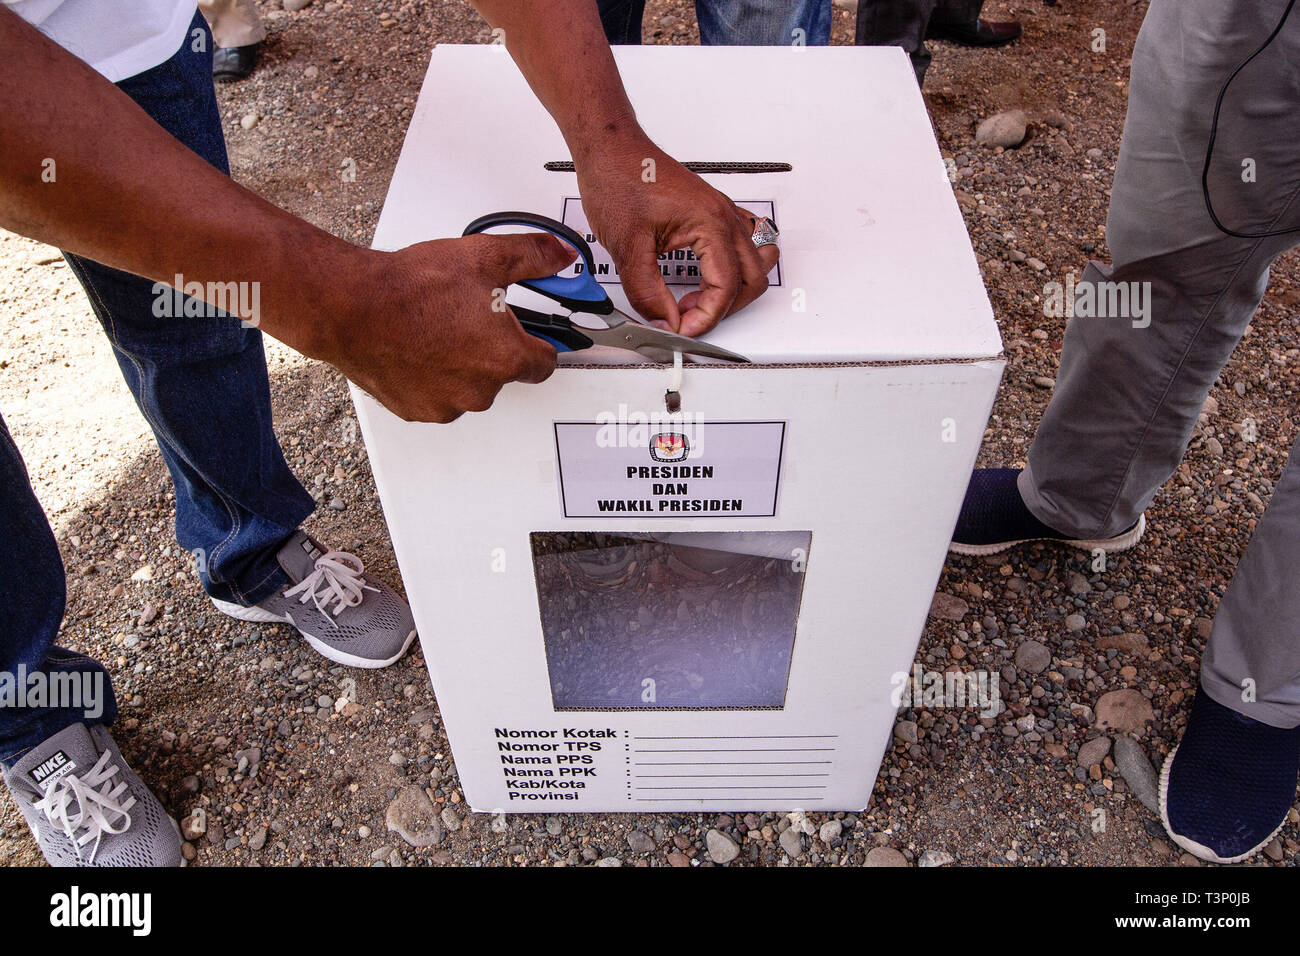 Lhokseumawe, Indonesia. 11th Apr, 2019. Officials seen preparing the ballot box during pre-election drill for president, vice-presidential candidates and legislative candidates in Lhokseumawe, Aceh province, Indonesia. Elections in Indonesia will take place next week on Wednesday April 17, 2019. Credit: SOPA Images Limited/Alamy Live News Stock Photo